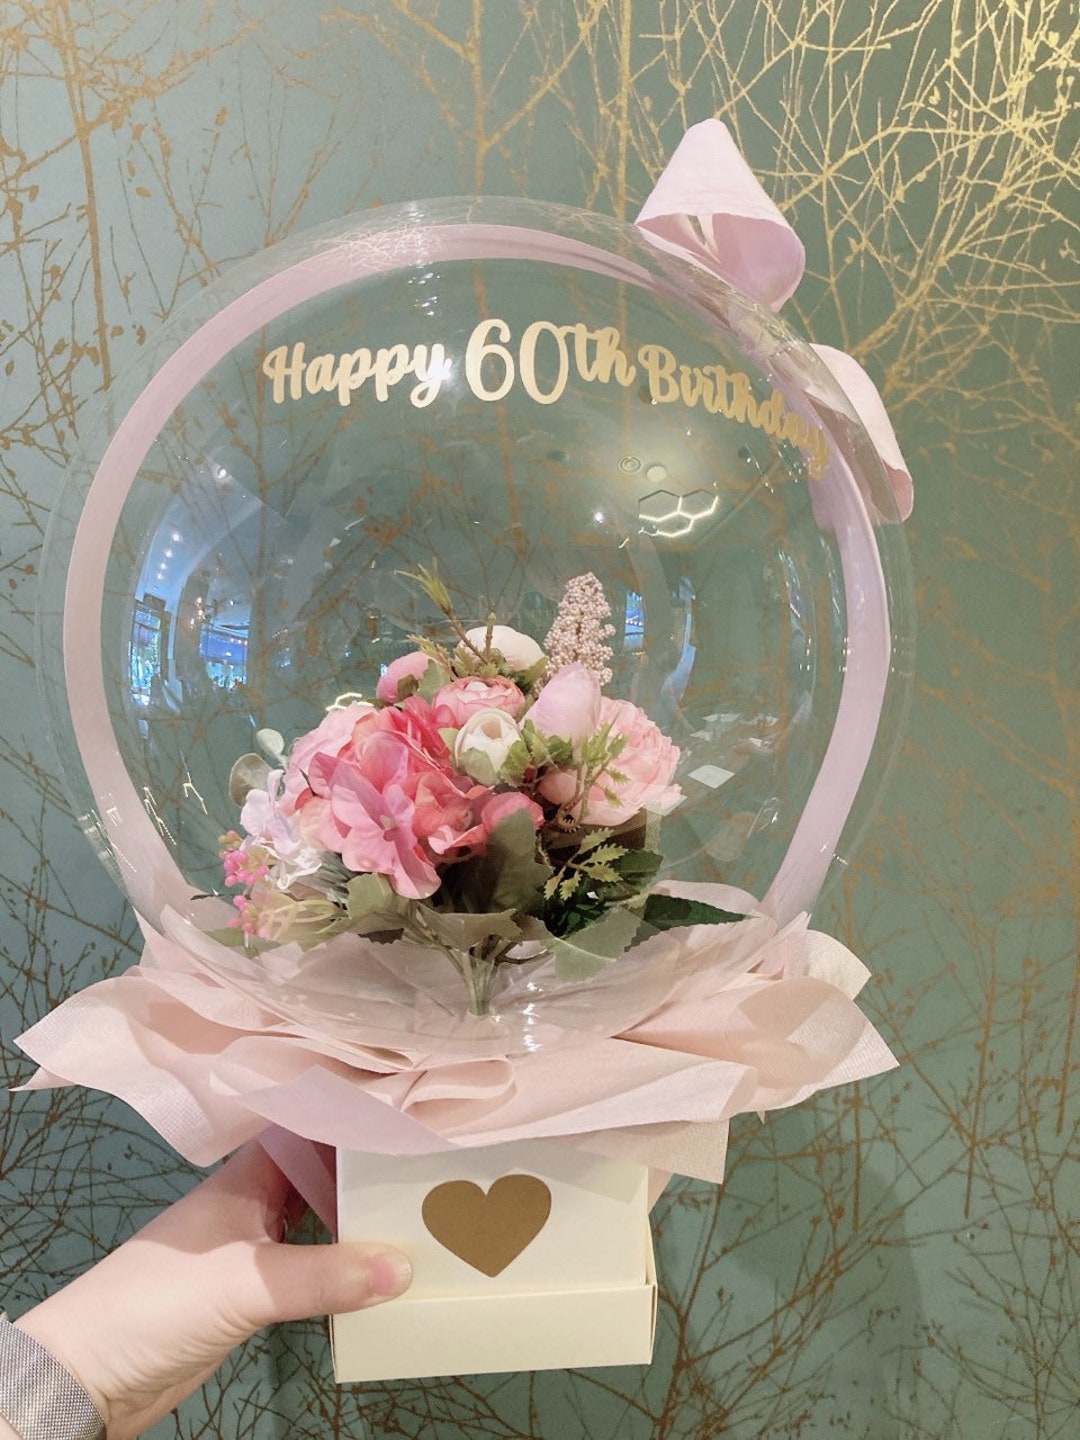 Happy Birthday Flowers in a Clear Balloon - Etsy